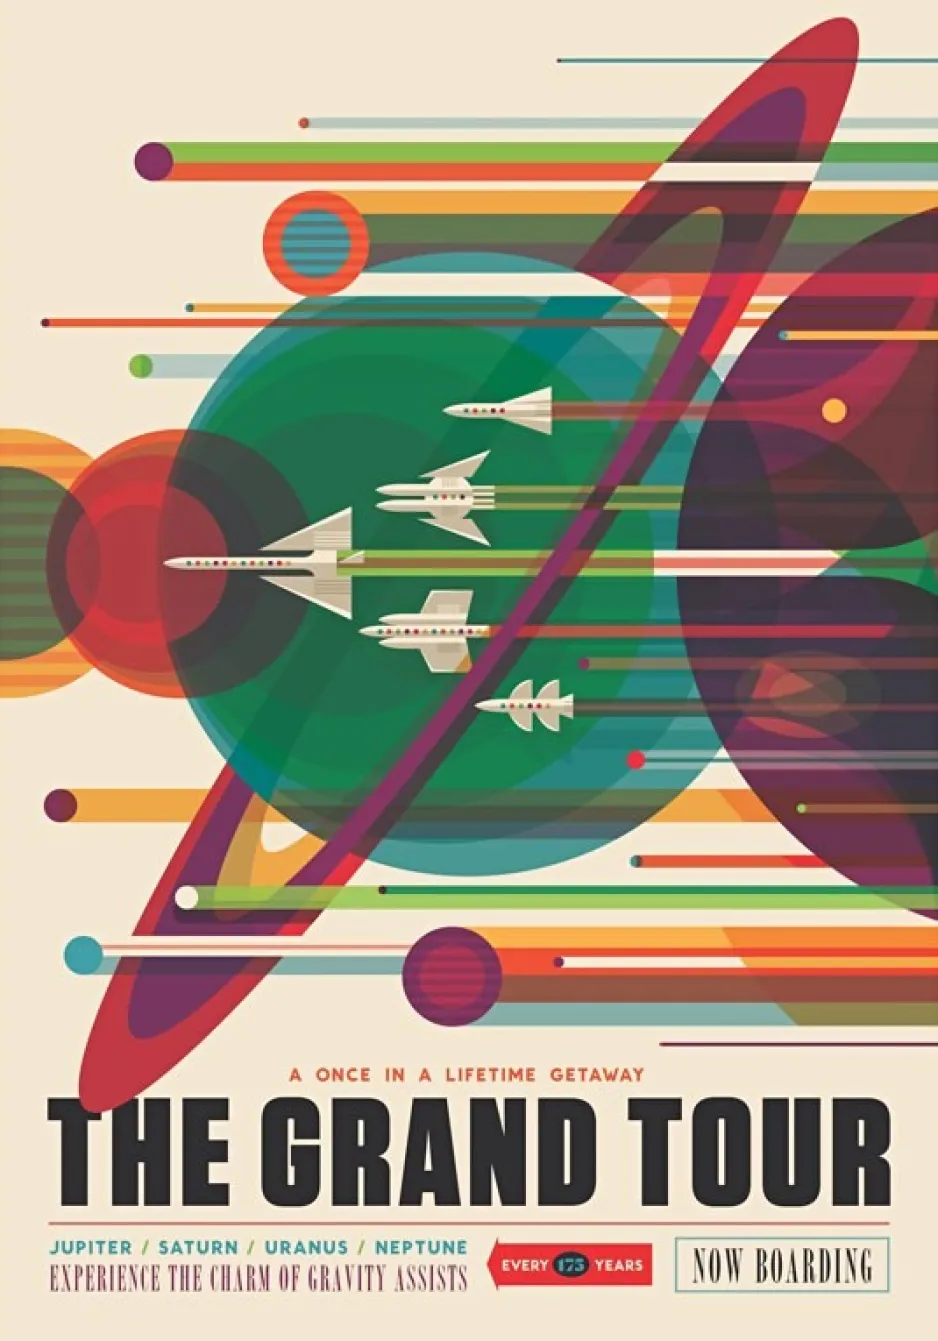 A colourful, cosmic illustration of five different spaceships flying to the left with a backdrop of four multi-coloured planets, and Saturn in the centre. At the bottom of the image in bold letters, it reads, “The Grand Tour” in large font. In smaller font, it says “A once in a lifetime getaway” and it’s advertised as every 173 years.